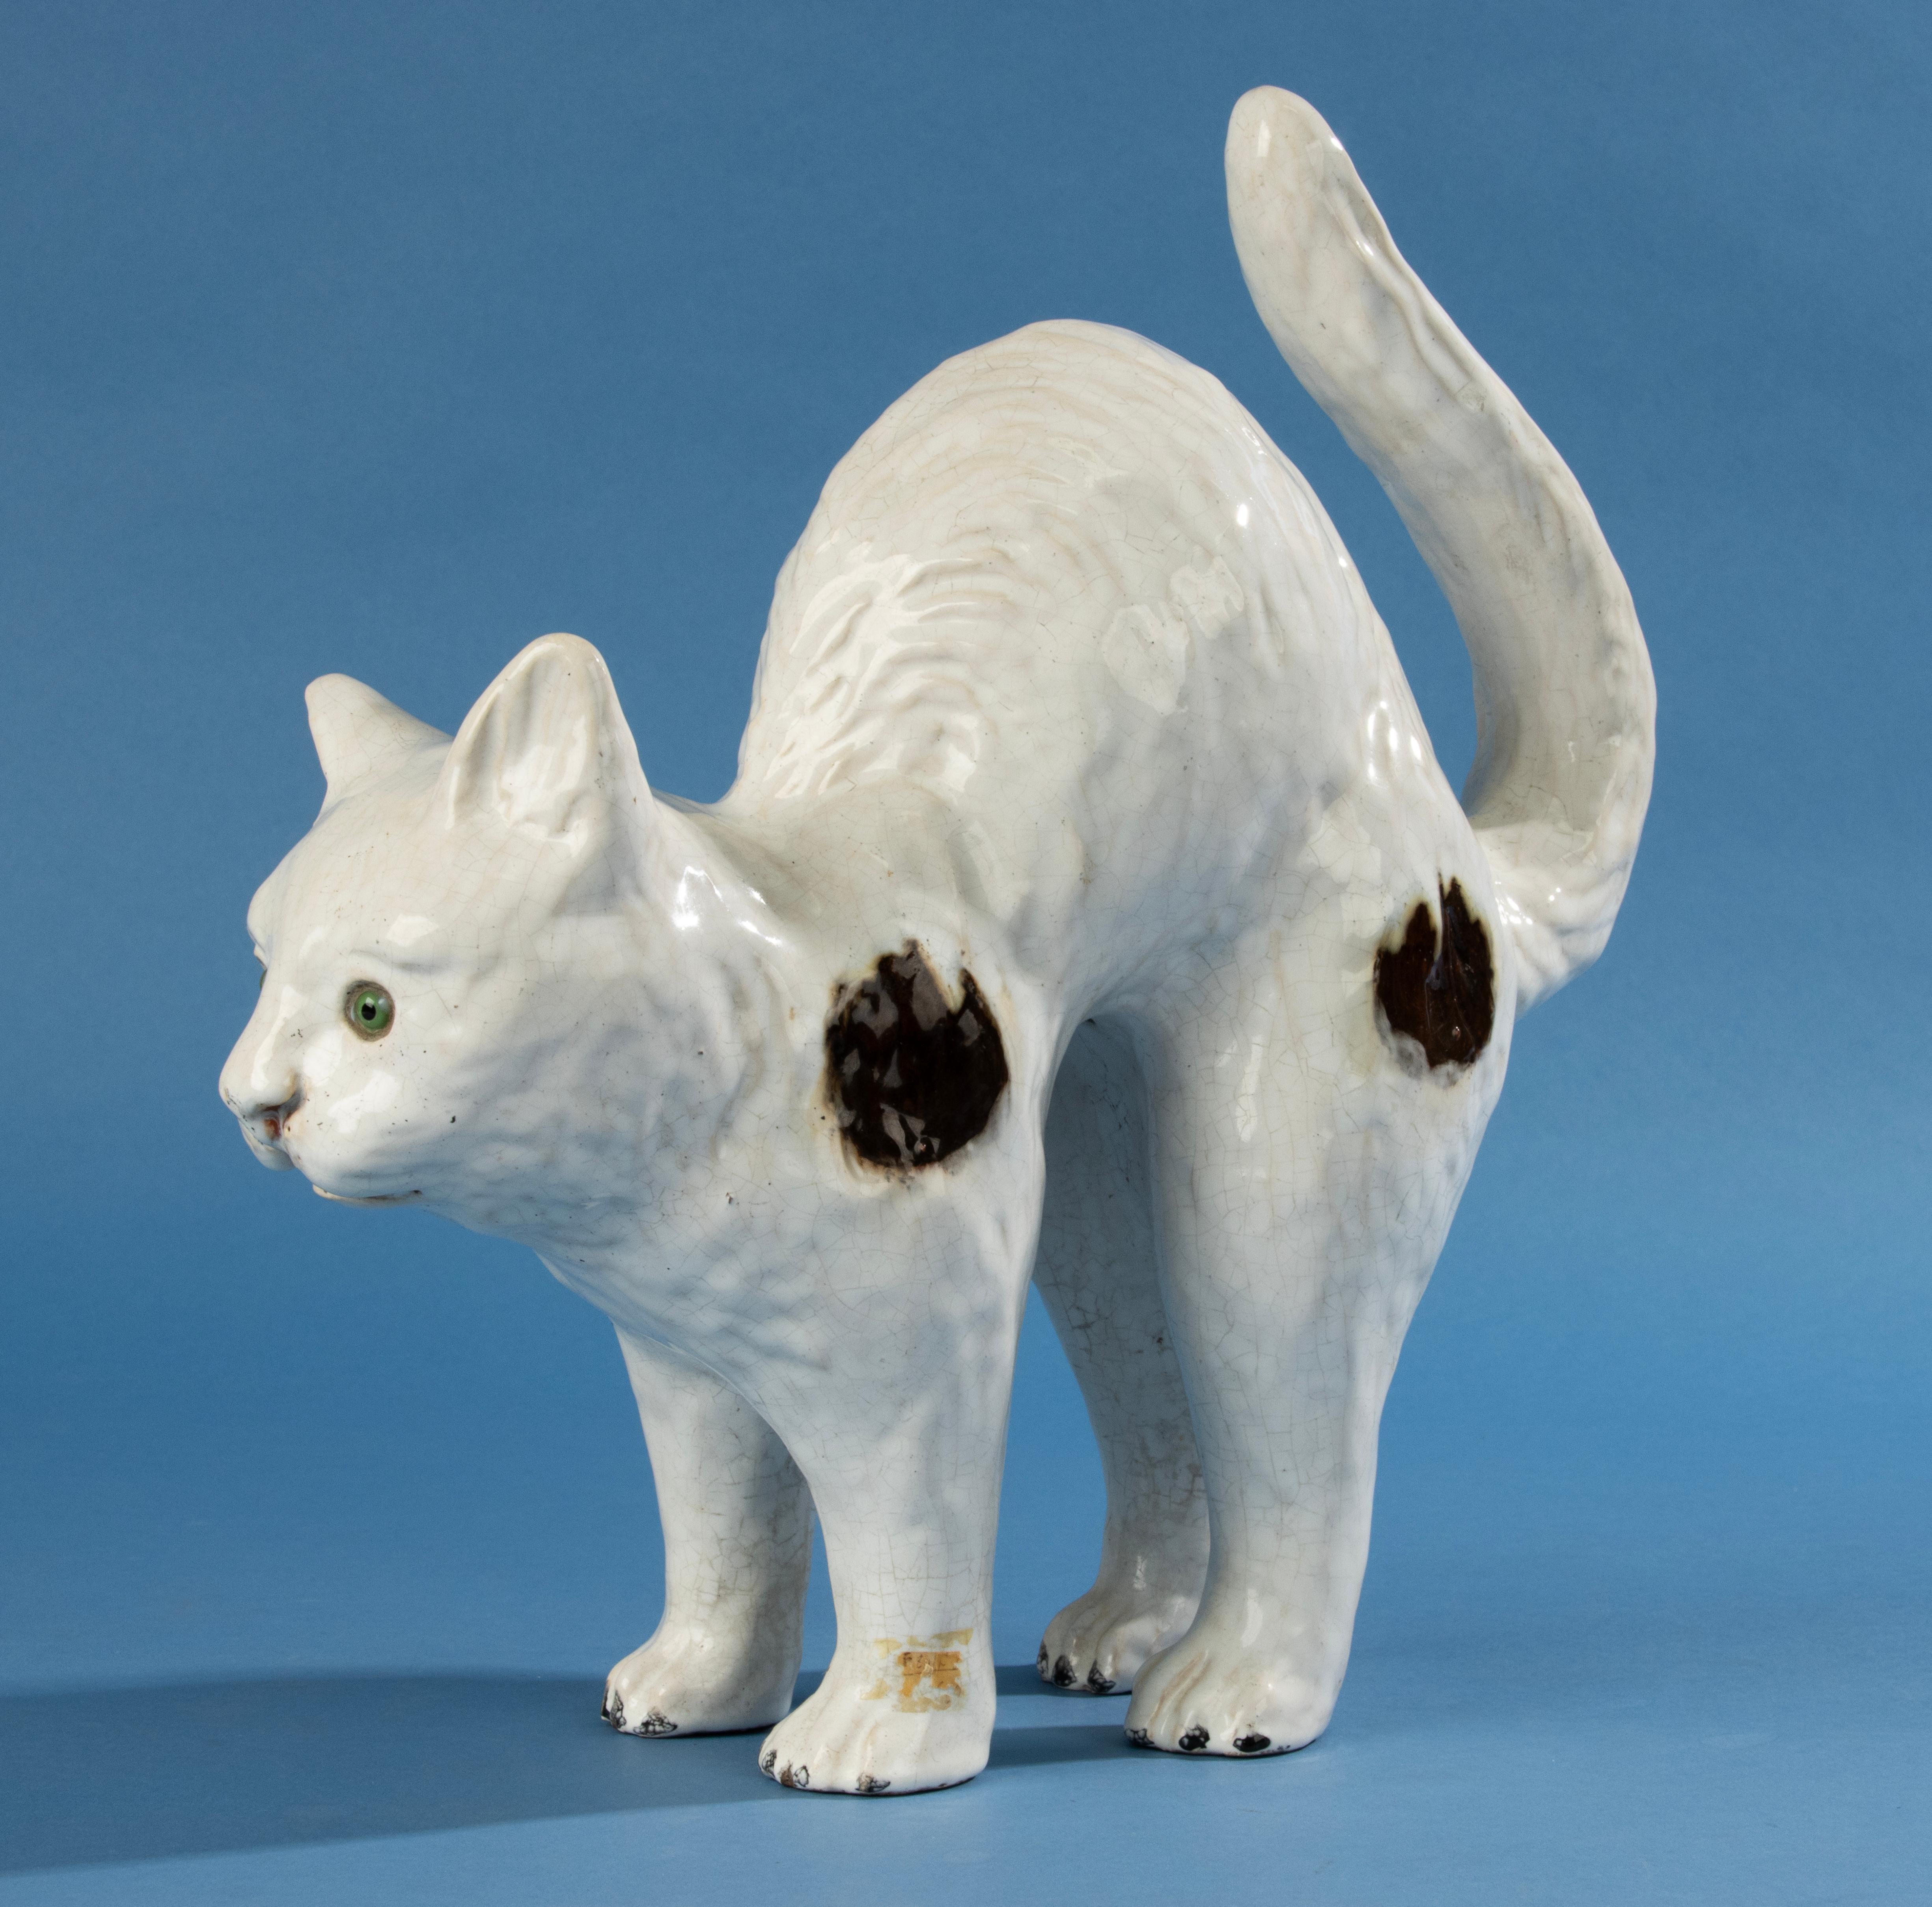 A beautiful ceramic cat, probably made by the French manufacturer Mesnil de Bavent. The cat is made of terracotta and has a nice tin-glaze layer with clear crackle. The cat has glass eyes.
The sculpture is not marked, but the design, the tin glaze